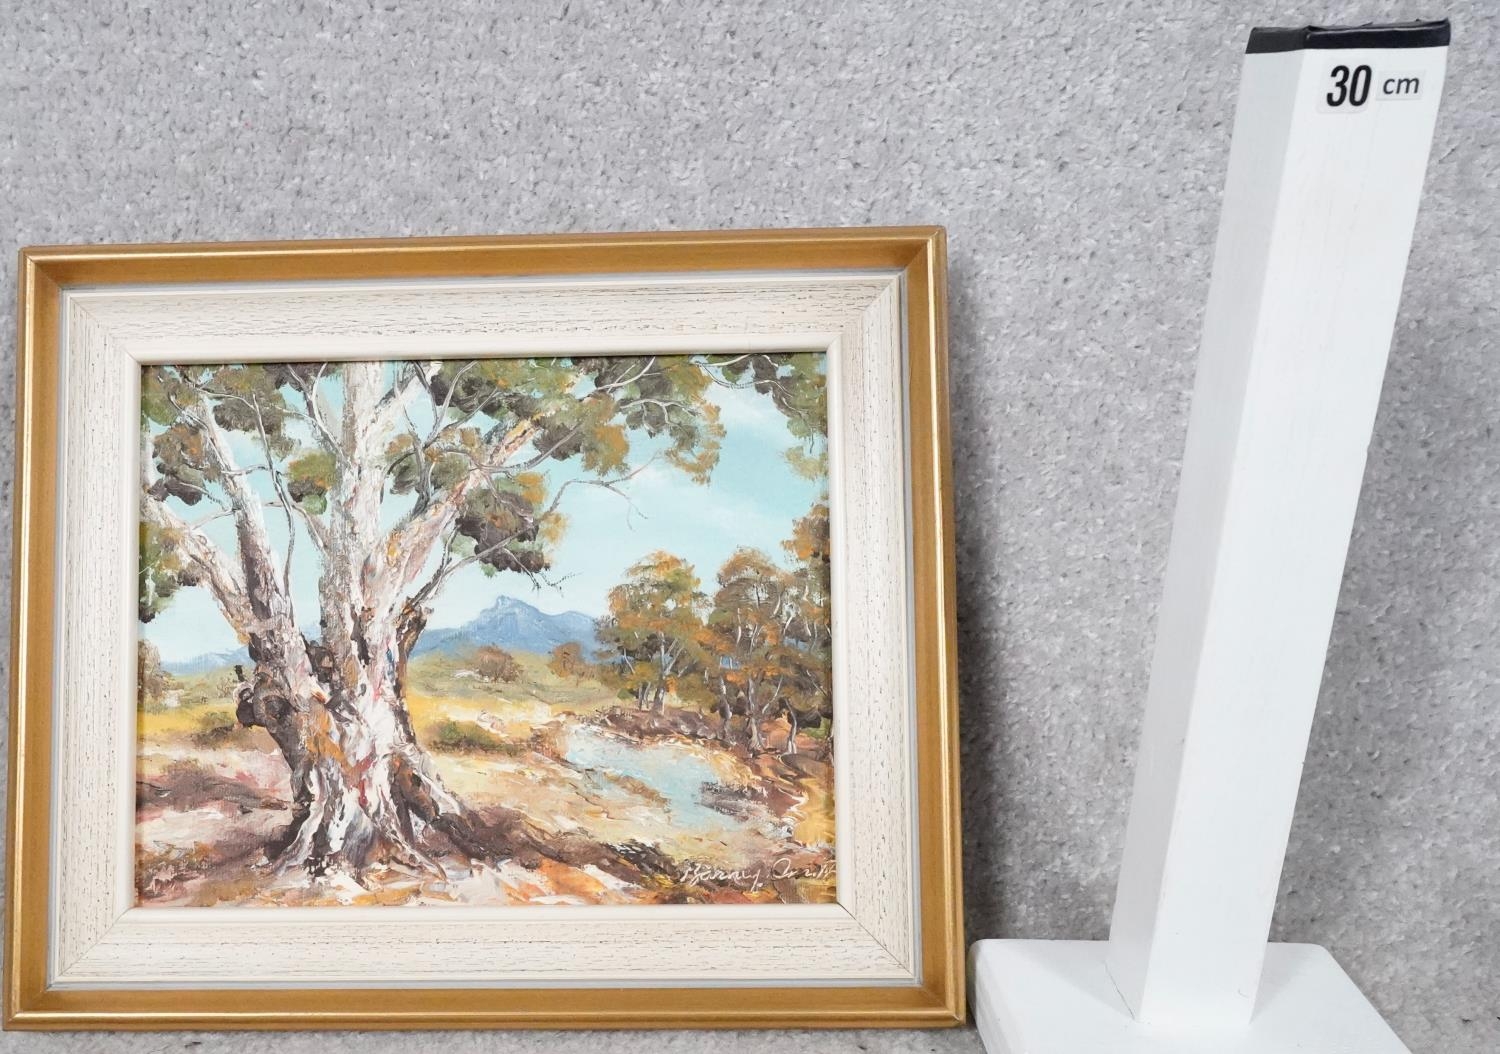 Four oils on canvas, tree studies in Australian landscapes, signed Barney Smith. H.26 W.32 - Image 10 of 15